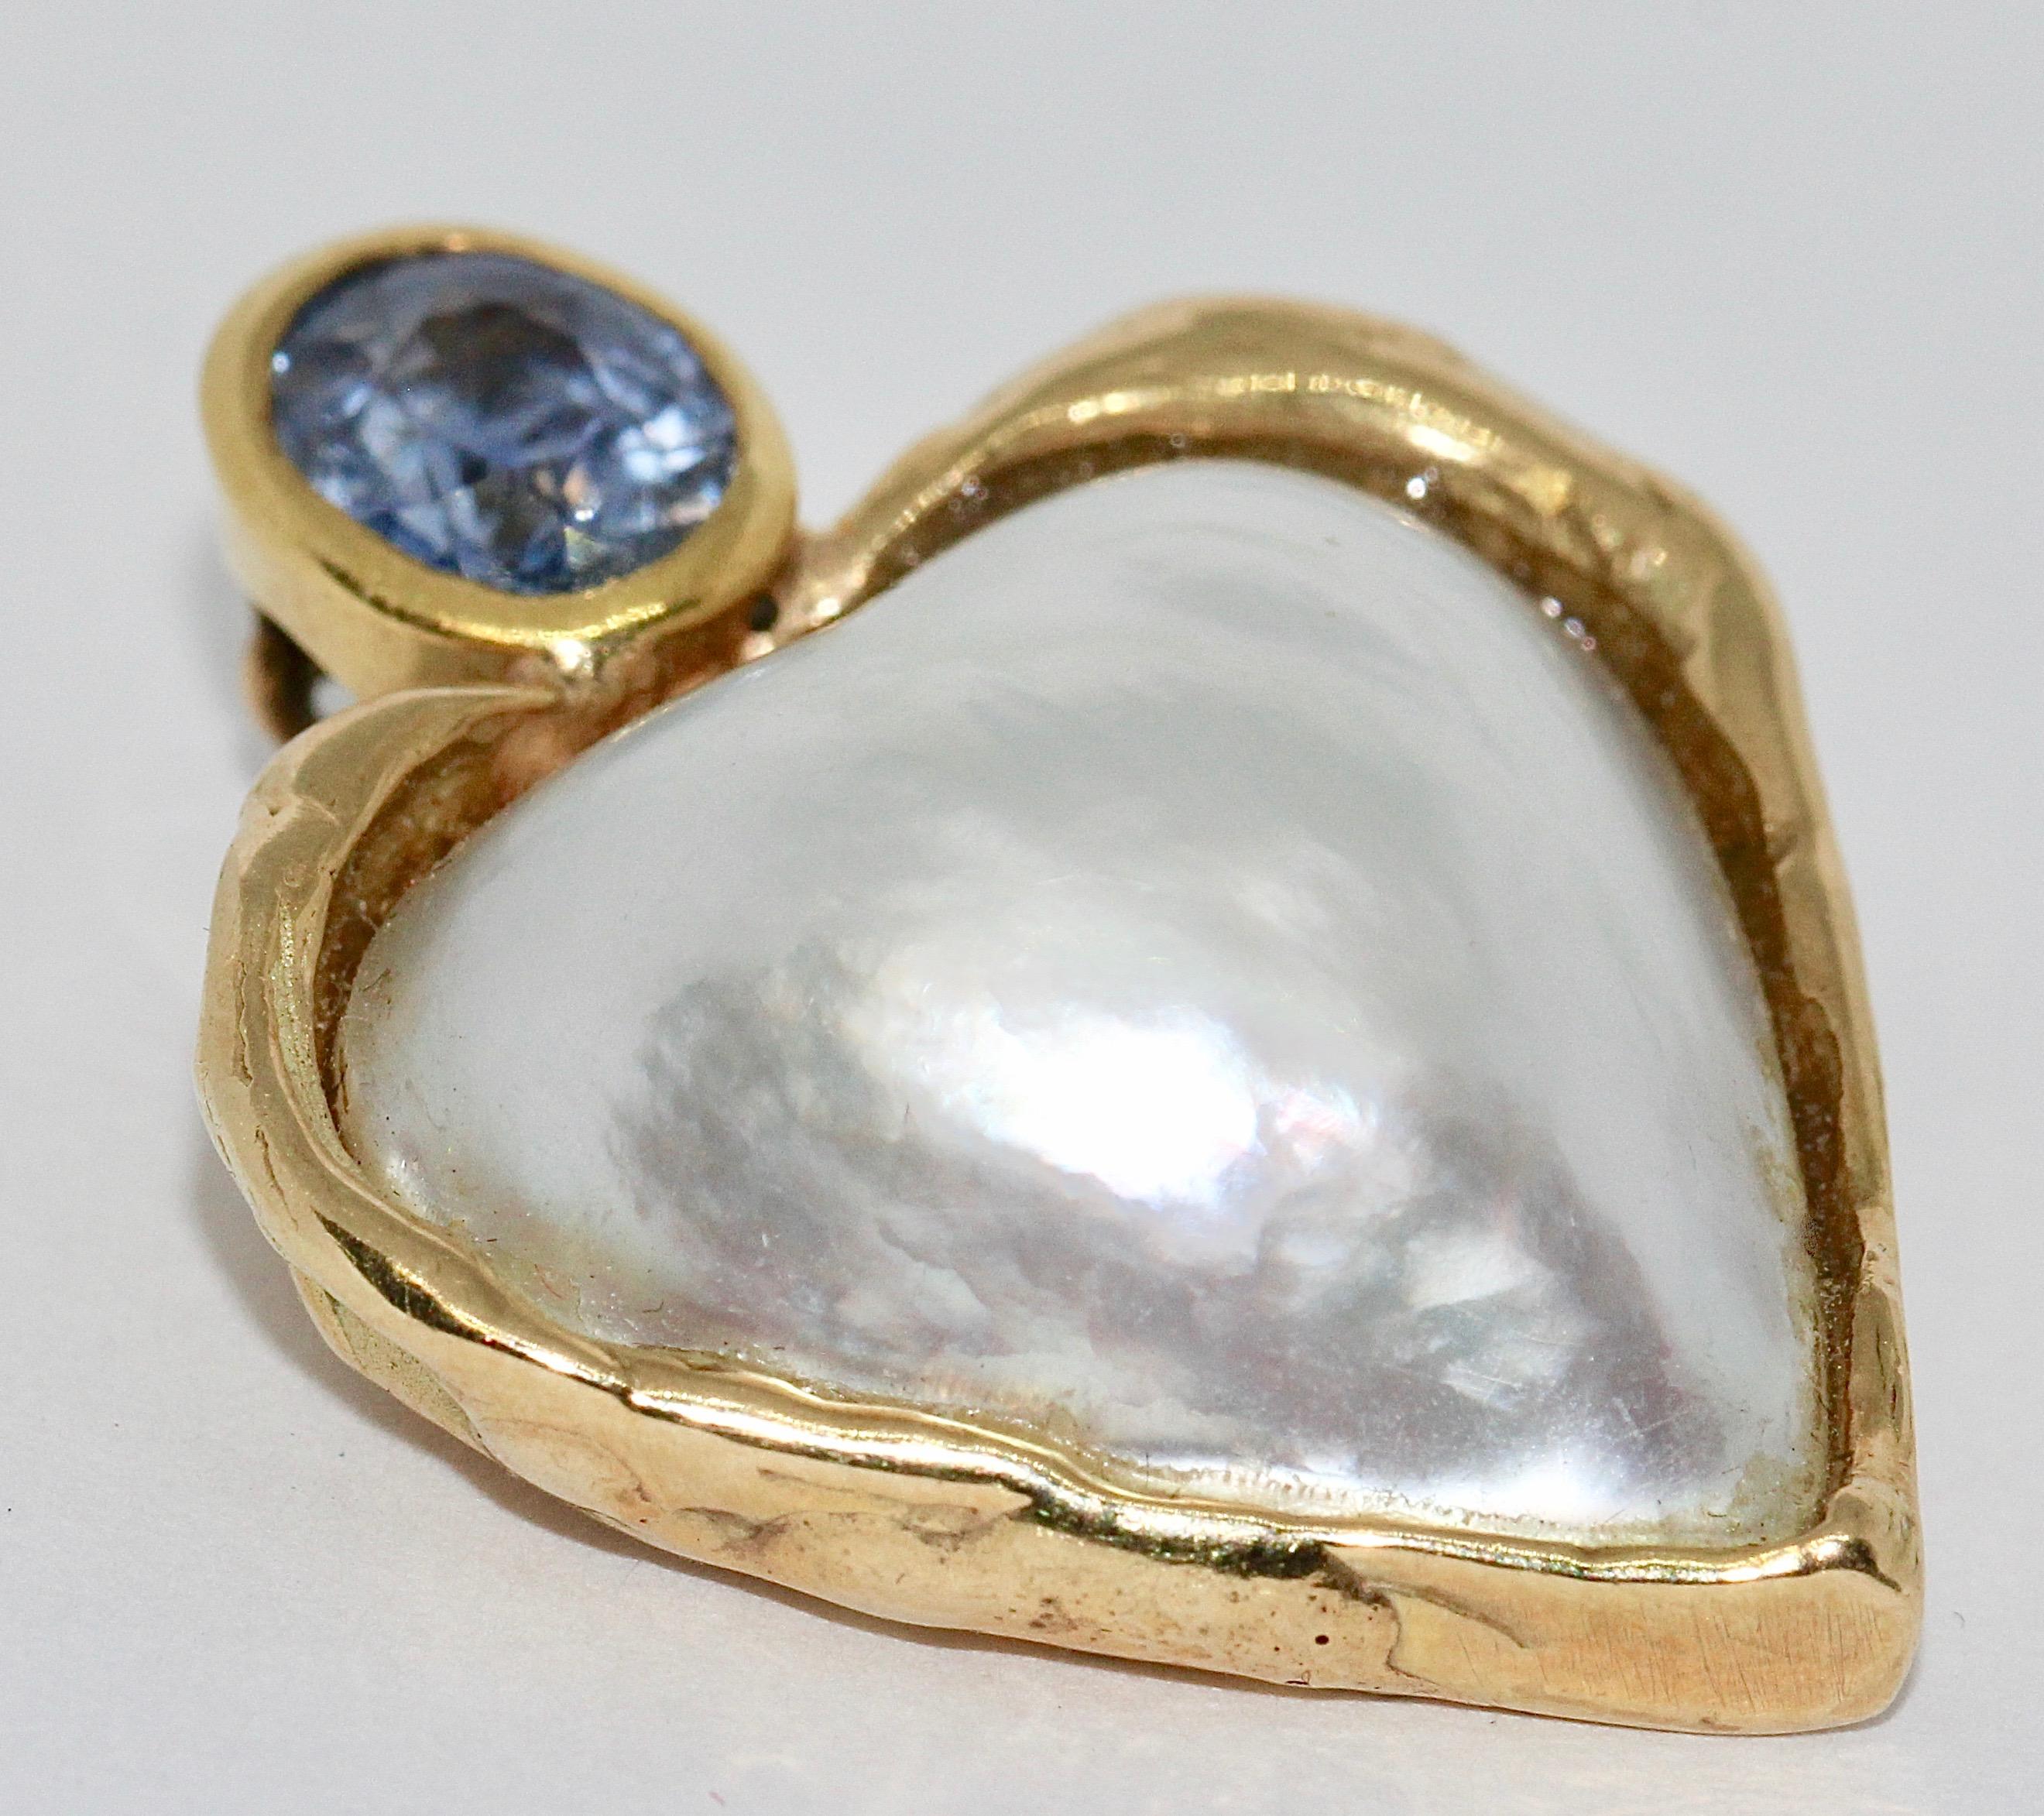 14 Karat Gold Pendant Enhancer, as Heart. With Mabé Pearl and Sapphire.

Hallmarked.